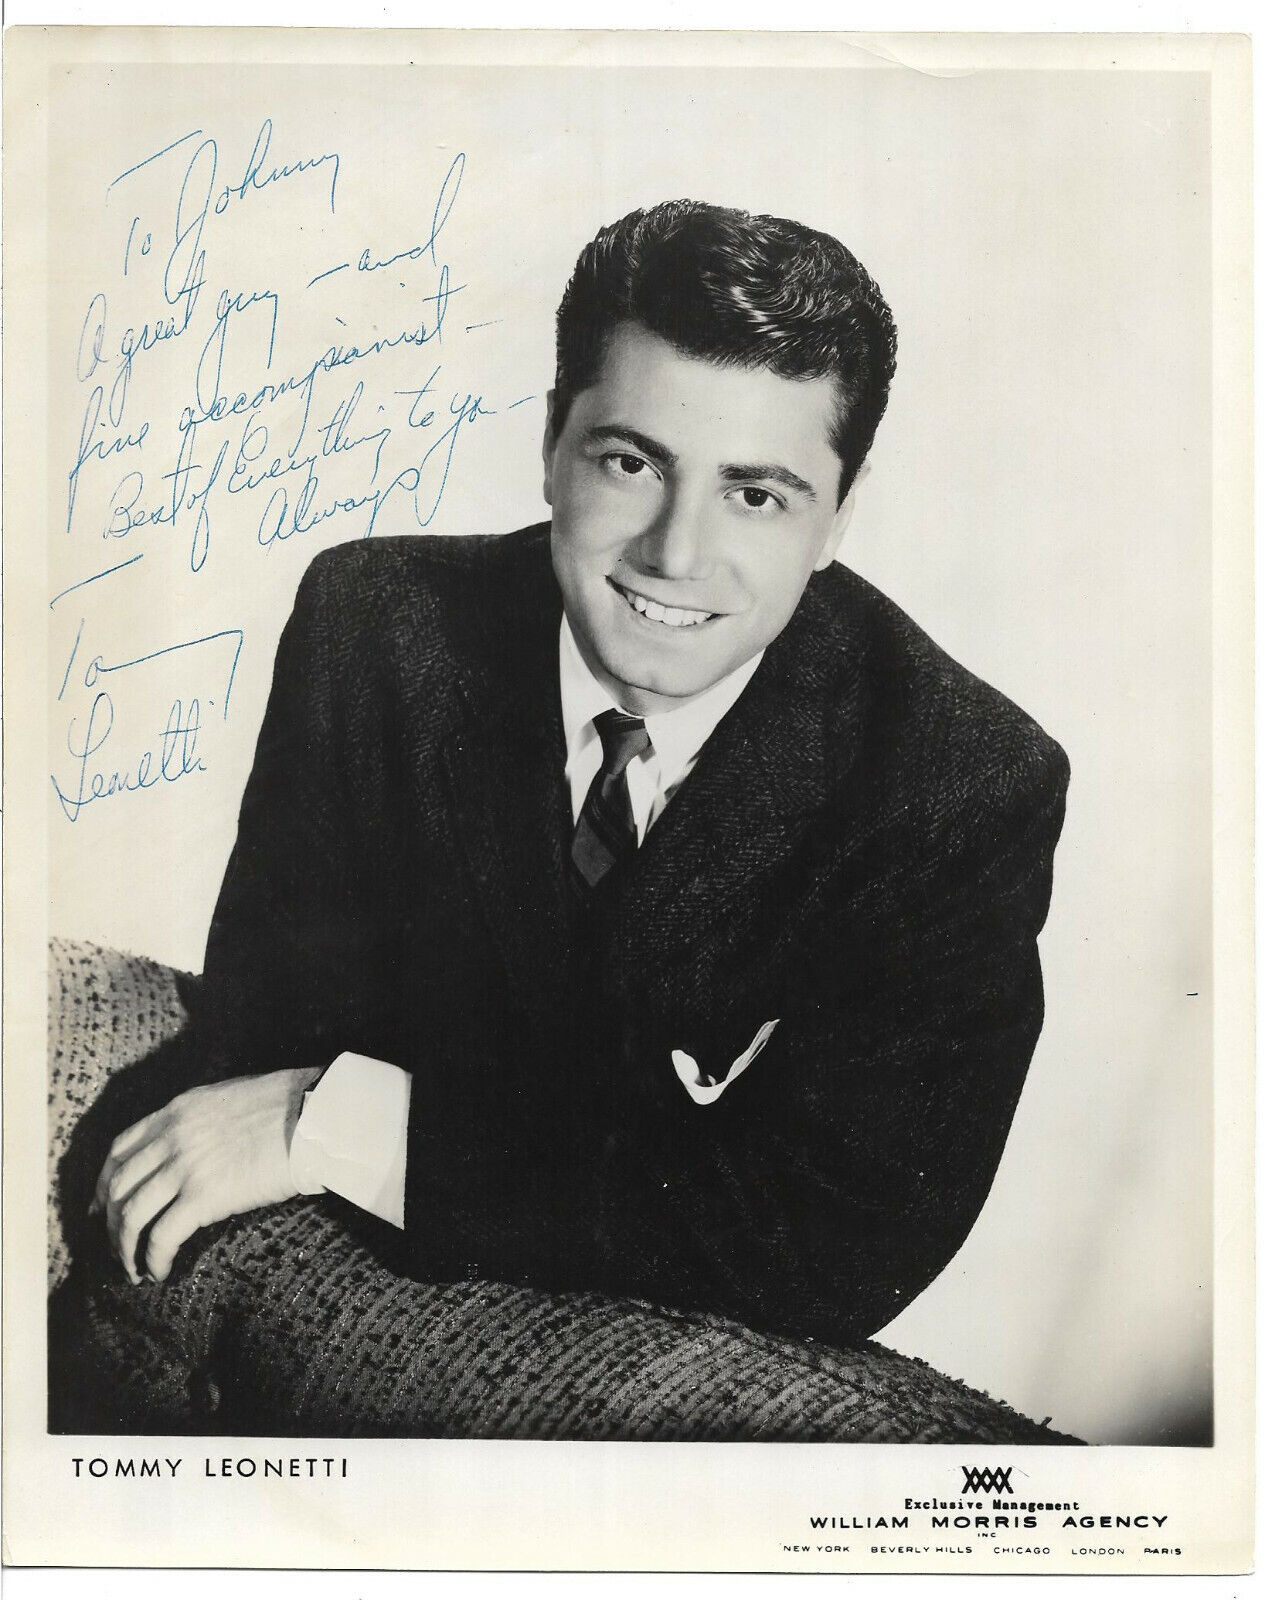 Tommy Leonetti Authentic Signed 8x10 Vintage Photo Poster painting Autographed